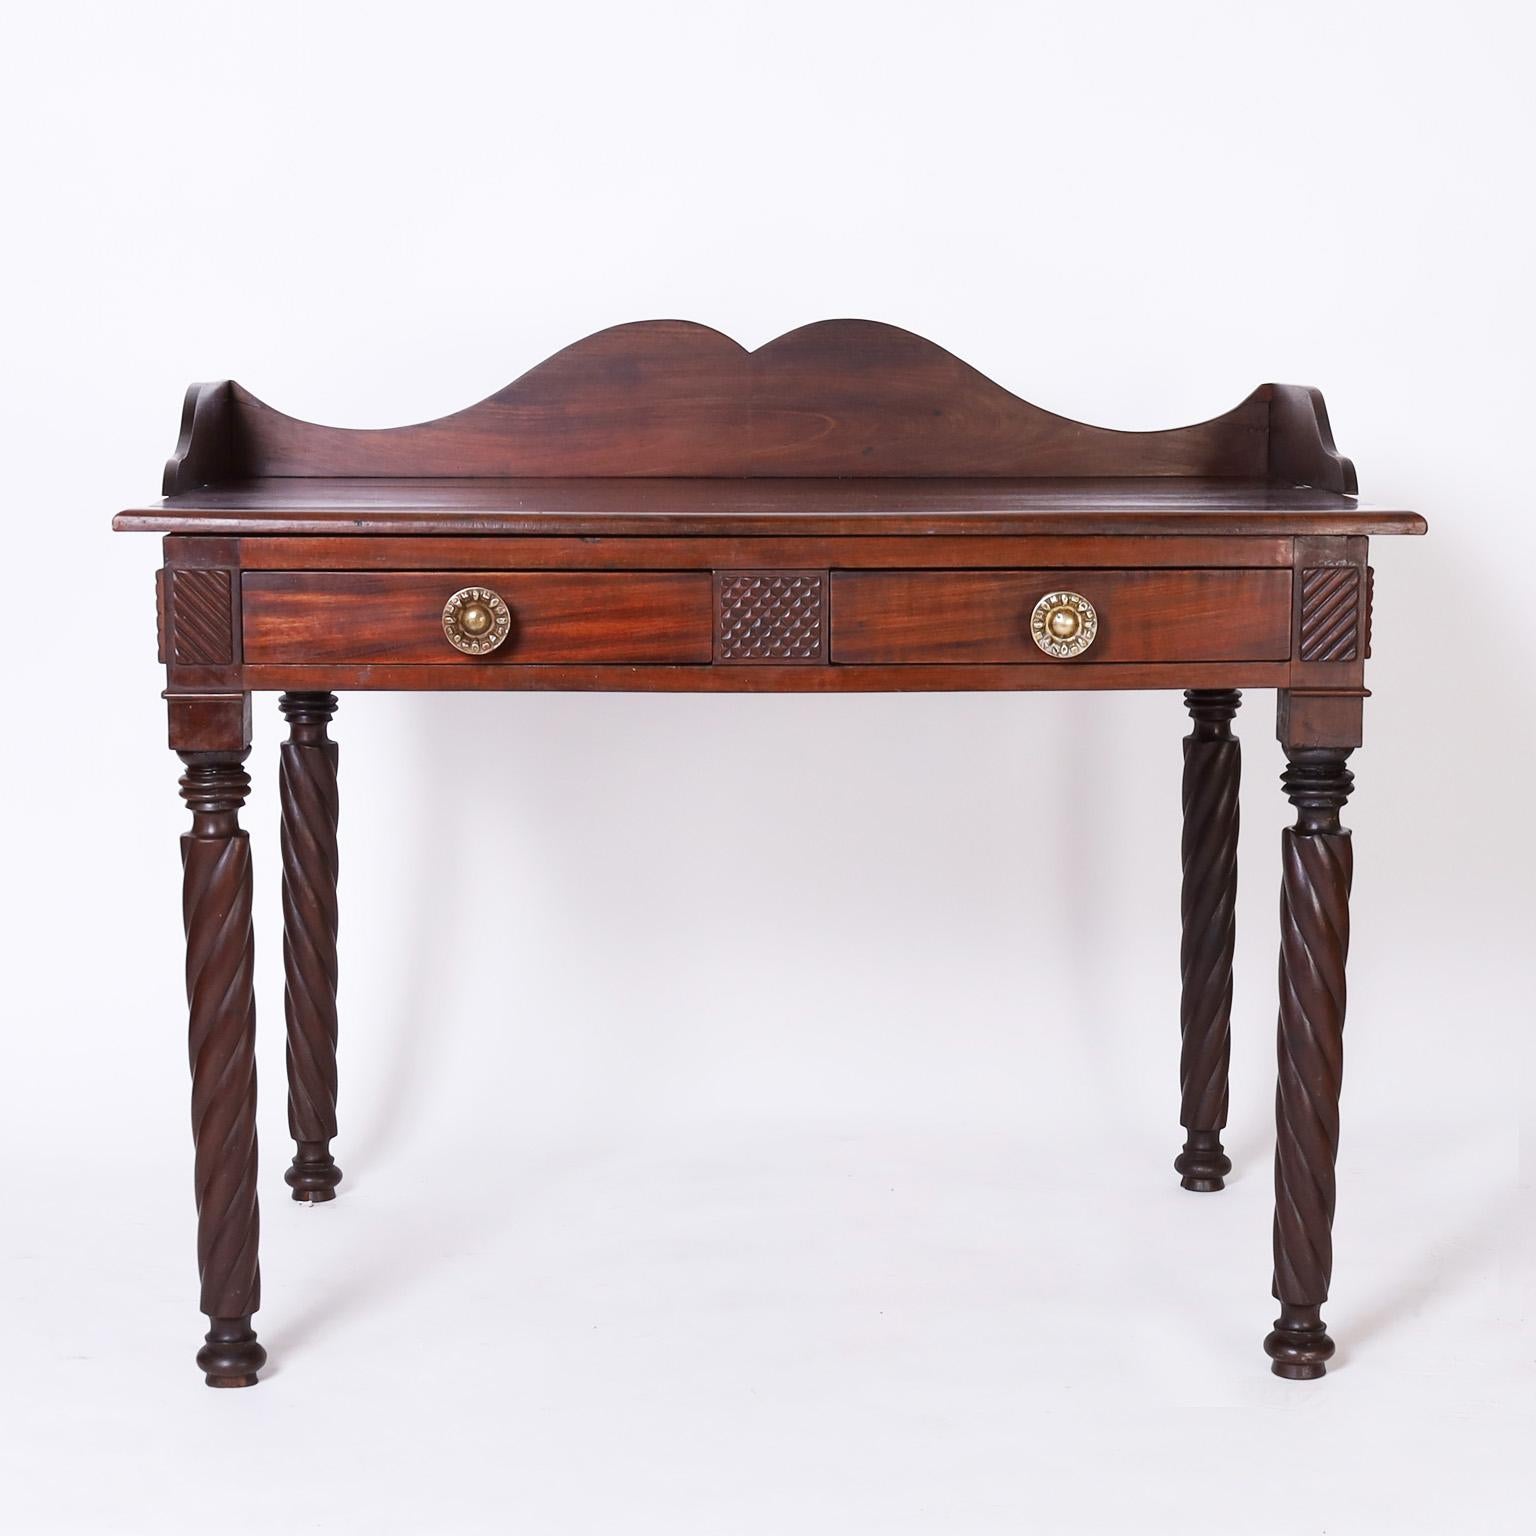 Transporting 19th century British Colonial West Indian writing table or server crafted in mahogany with gallery at the top, two drawers with cast brass hardware, and turned legs.